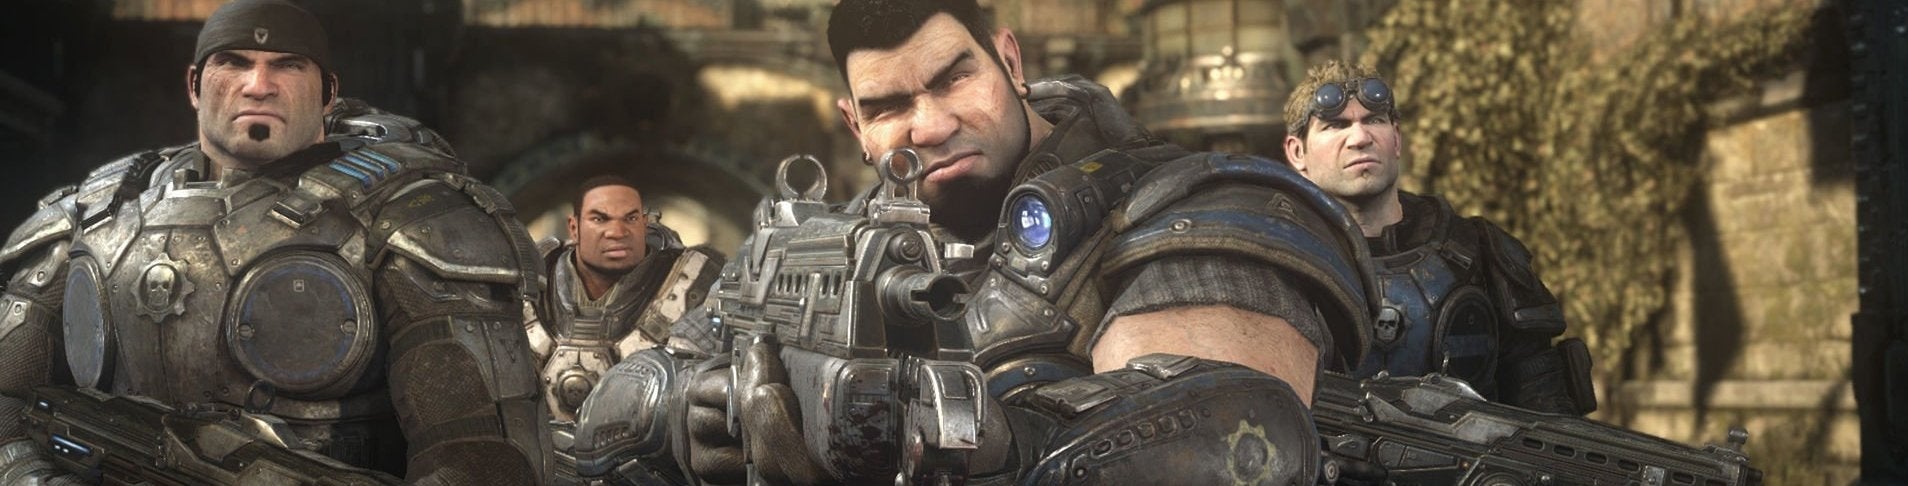 Image for What returning to Gears of War says about the series' future